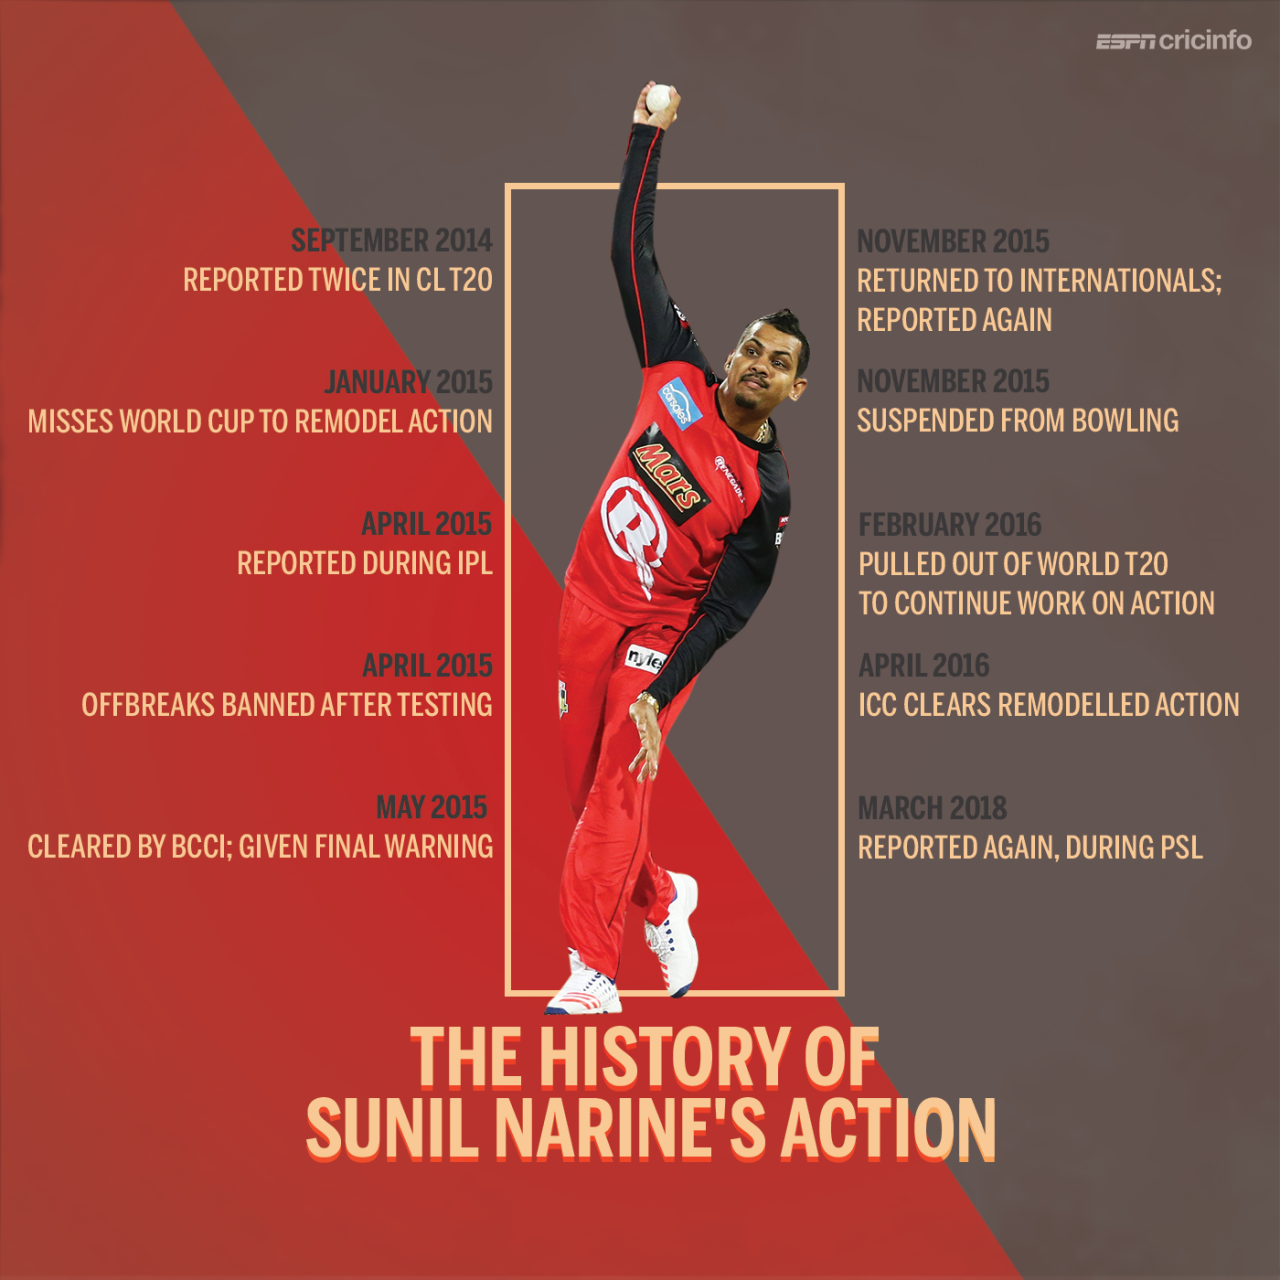 A history of Sunil Narine's action, March 16, 2018